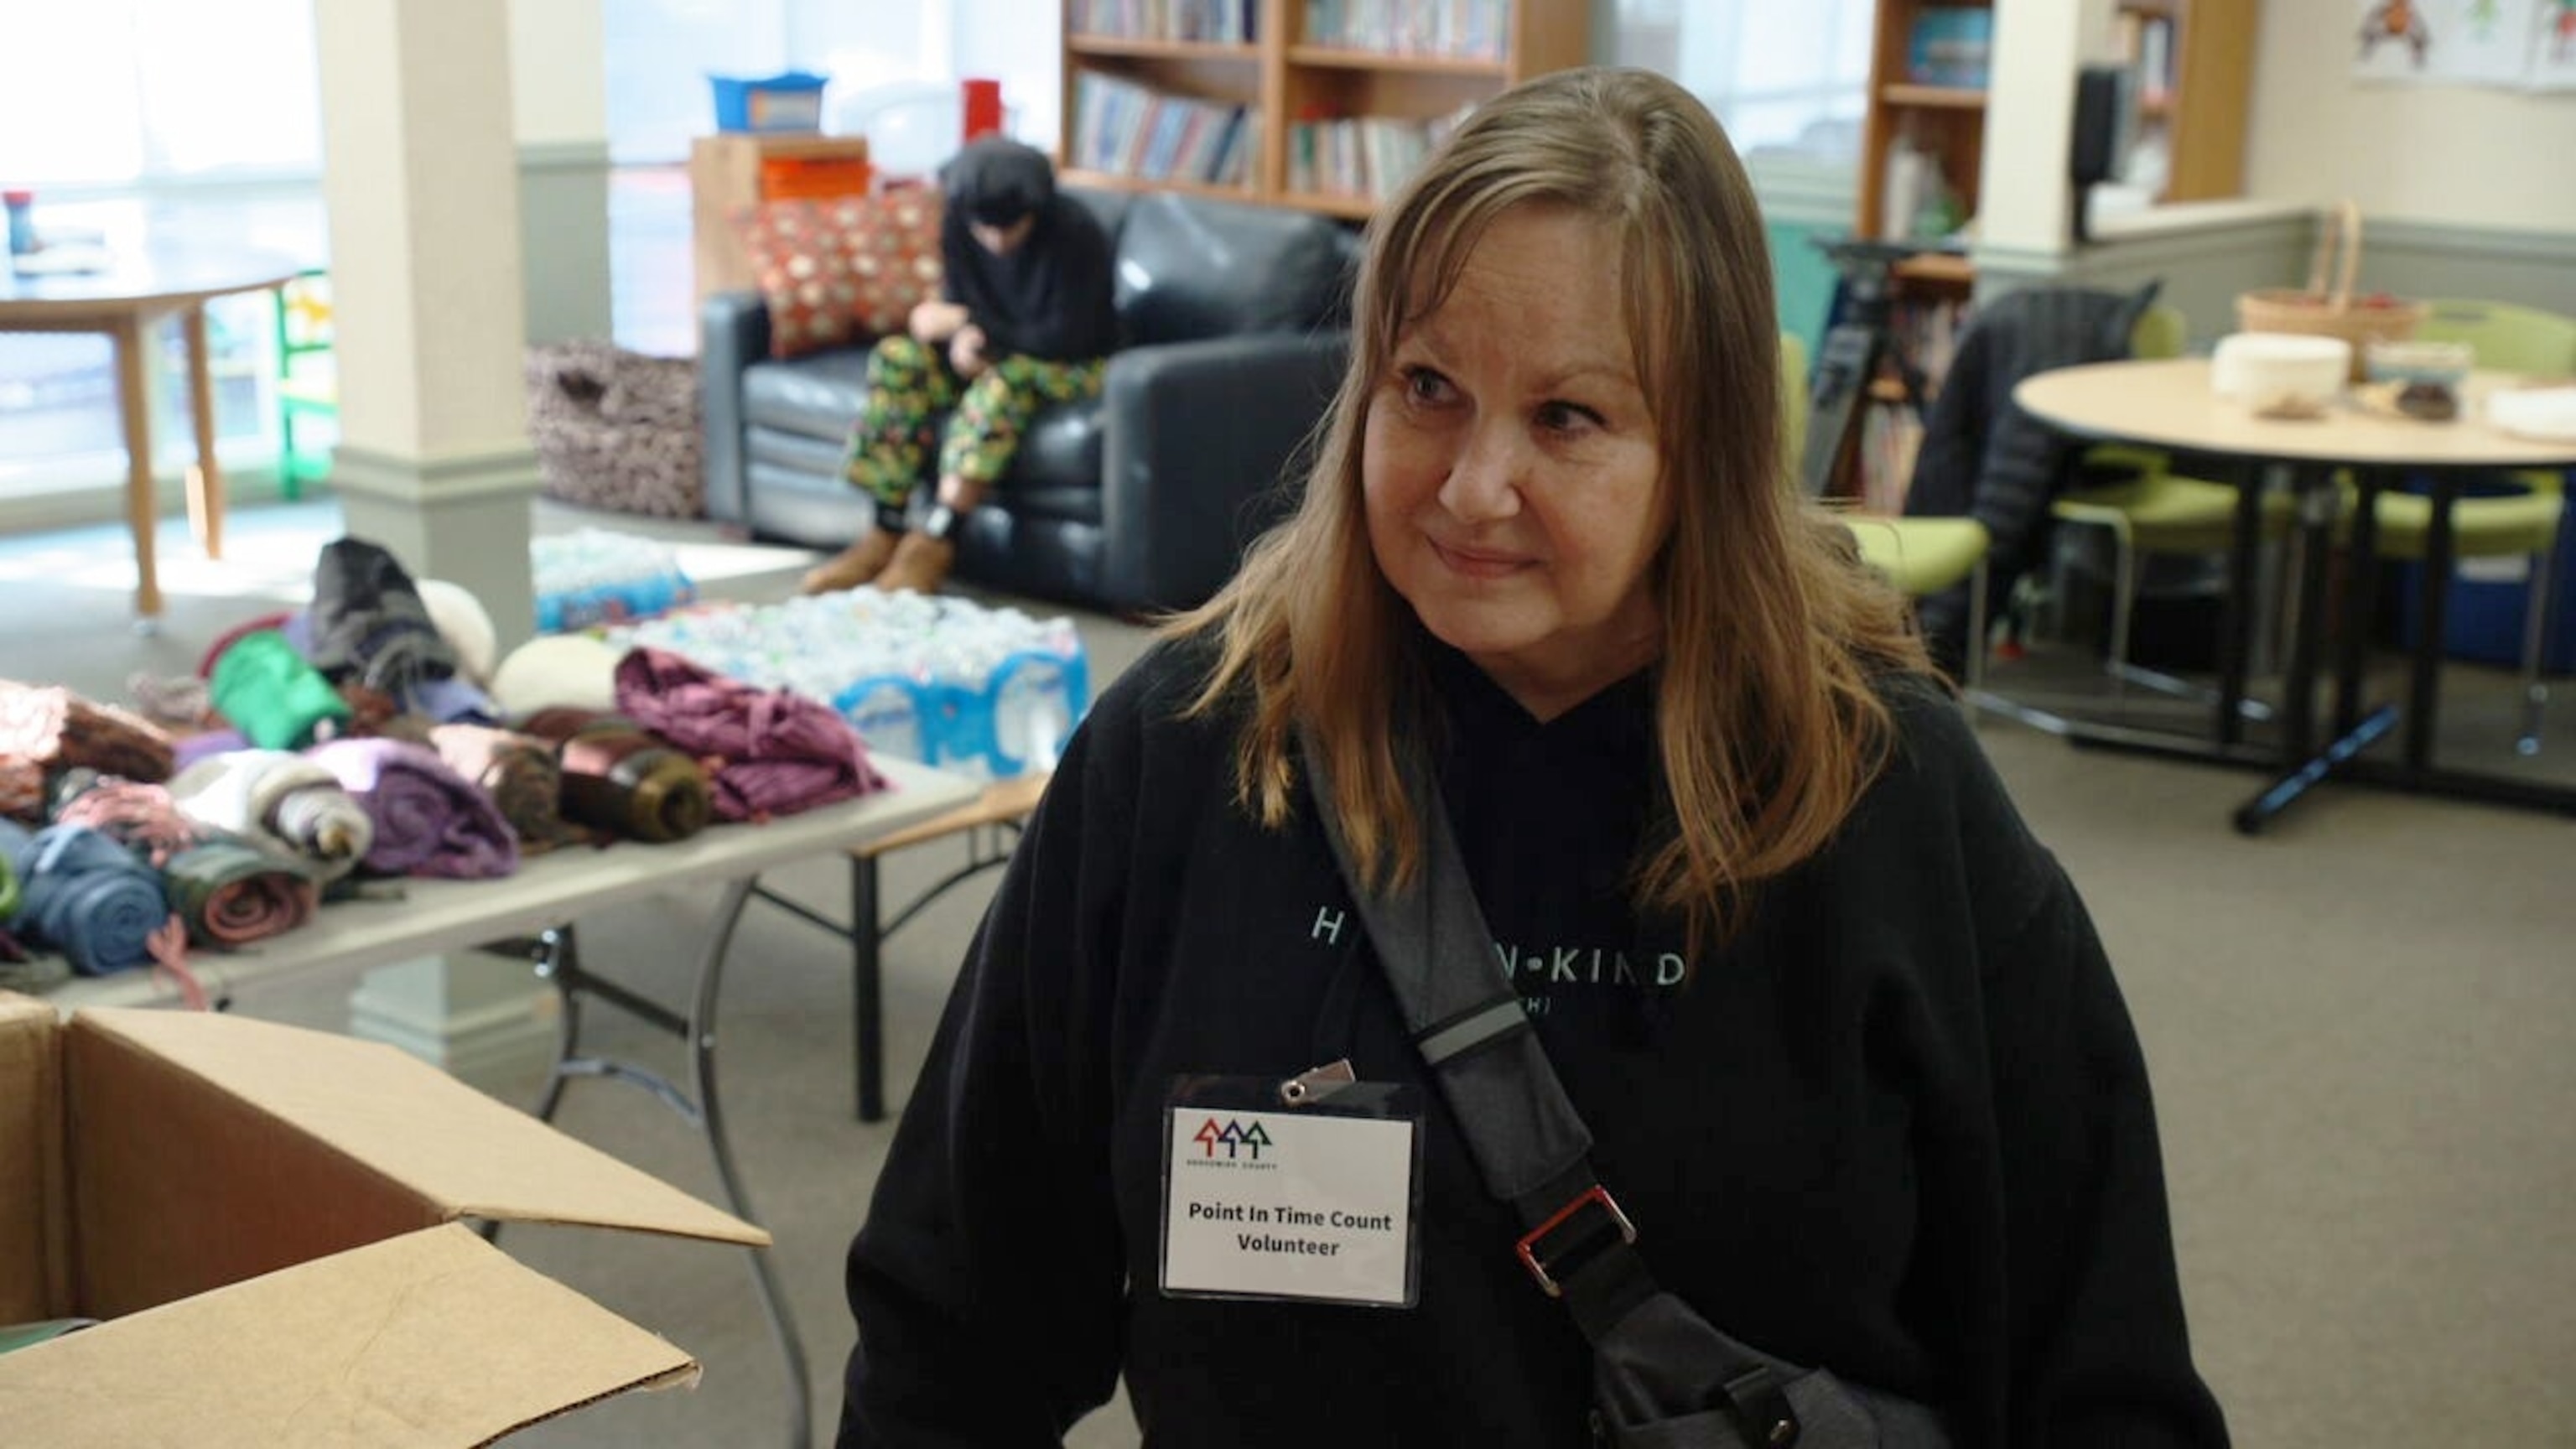 PHOTO: Mindy Woods lived in a YWCA shelter when she experienced homelessness, and she now volunteers with the organization to conduct the Point-in-Time count.